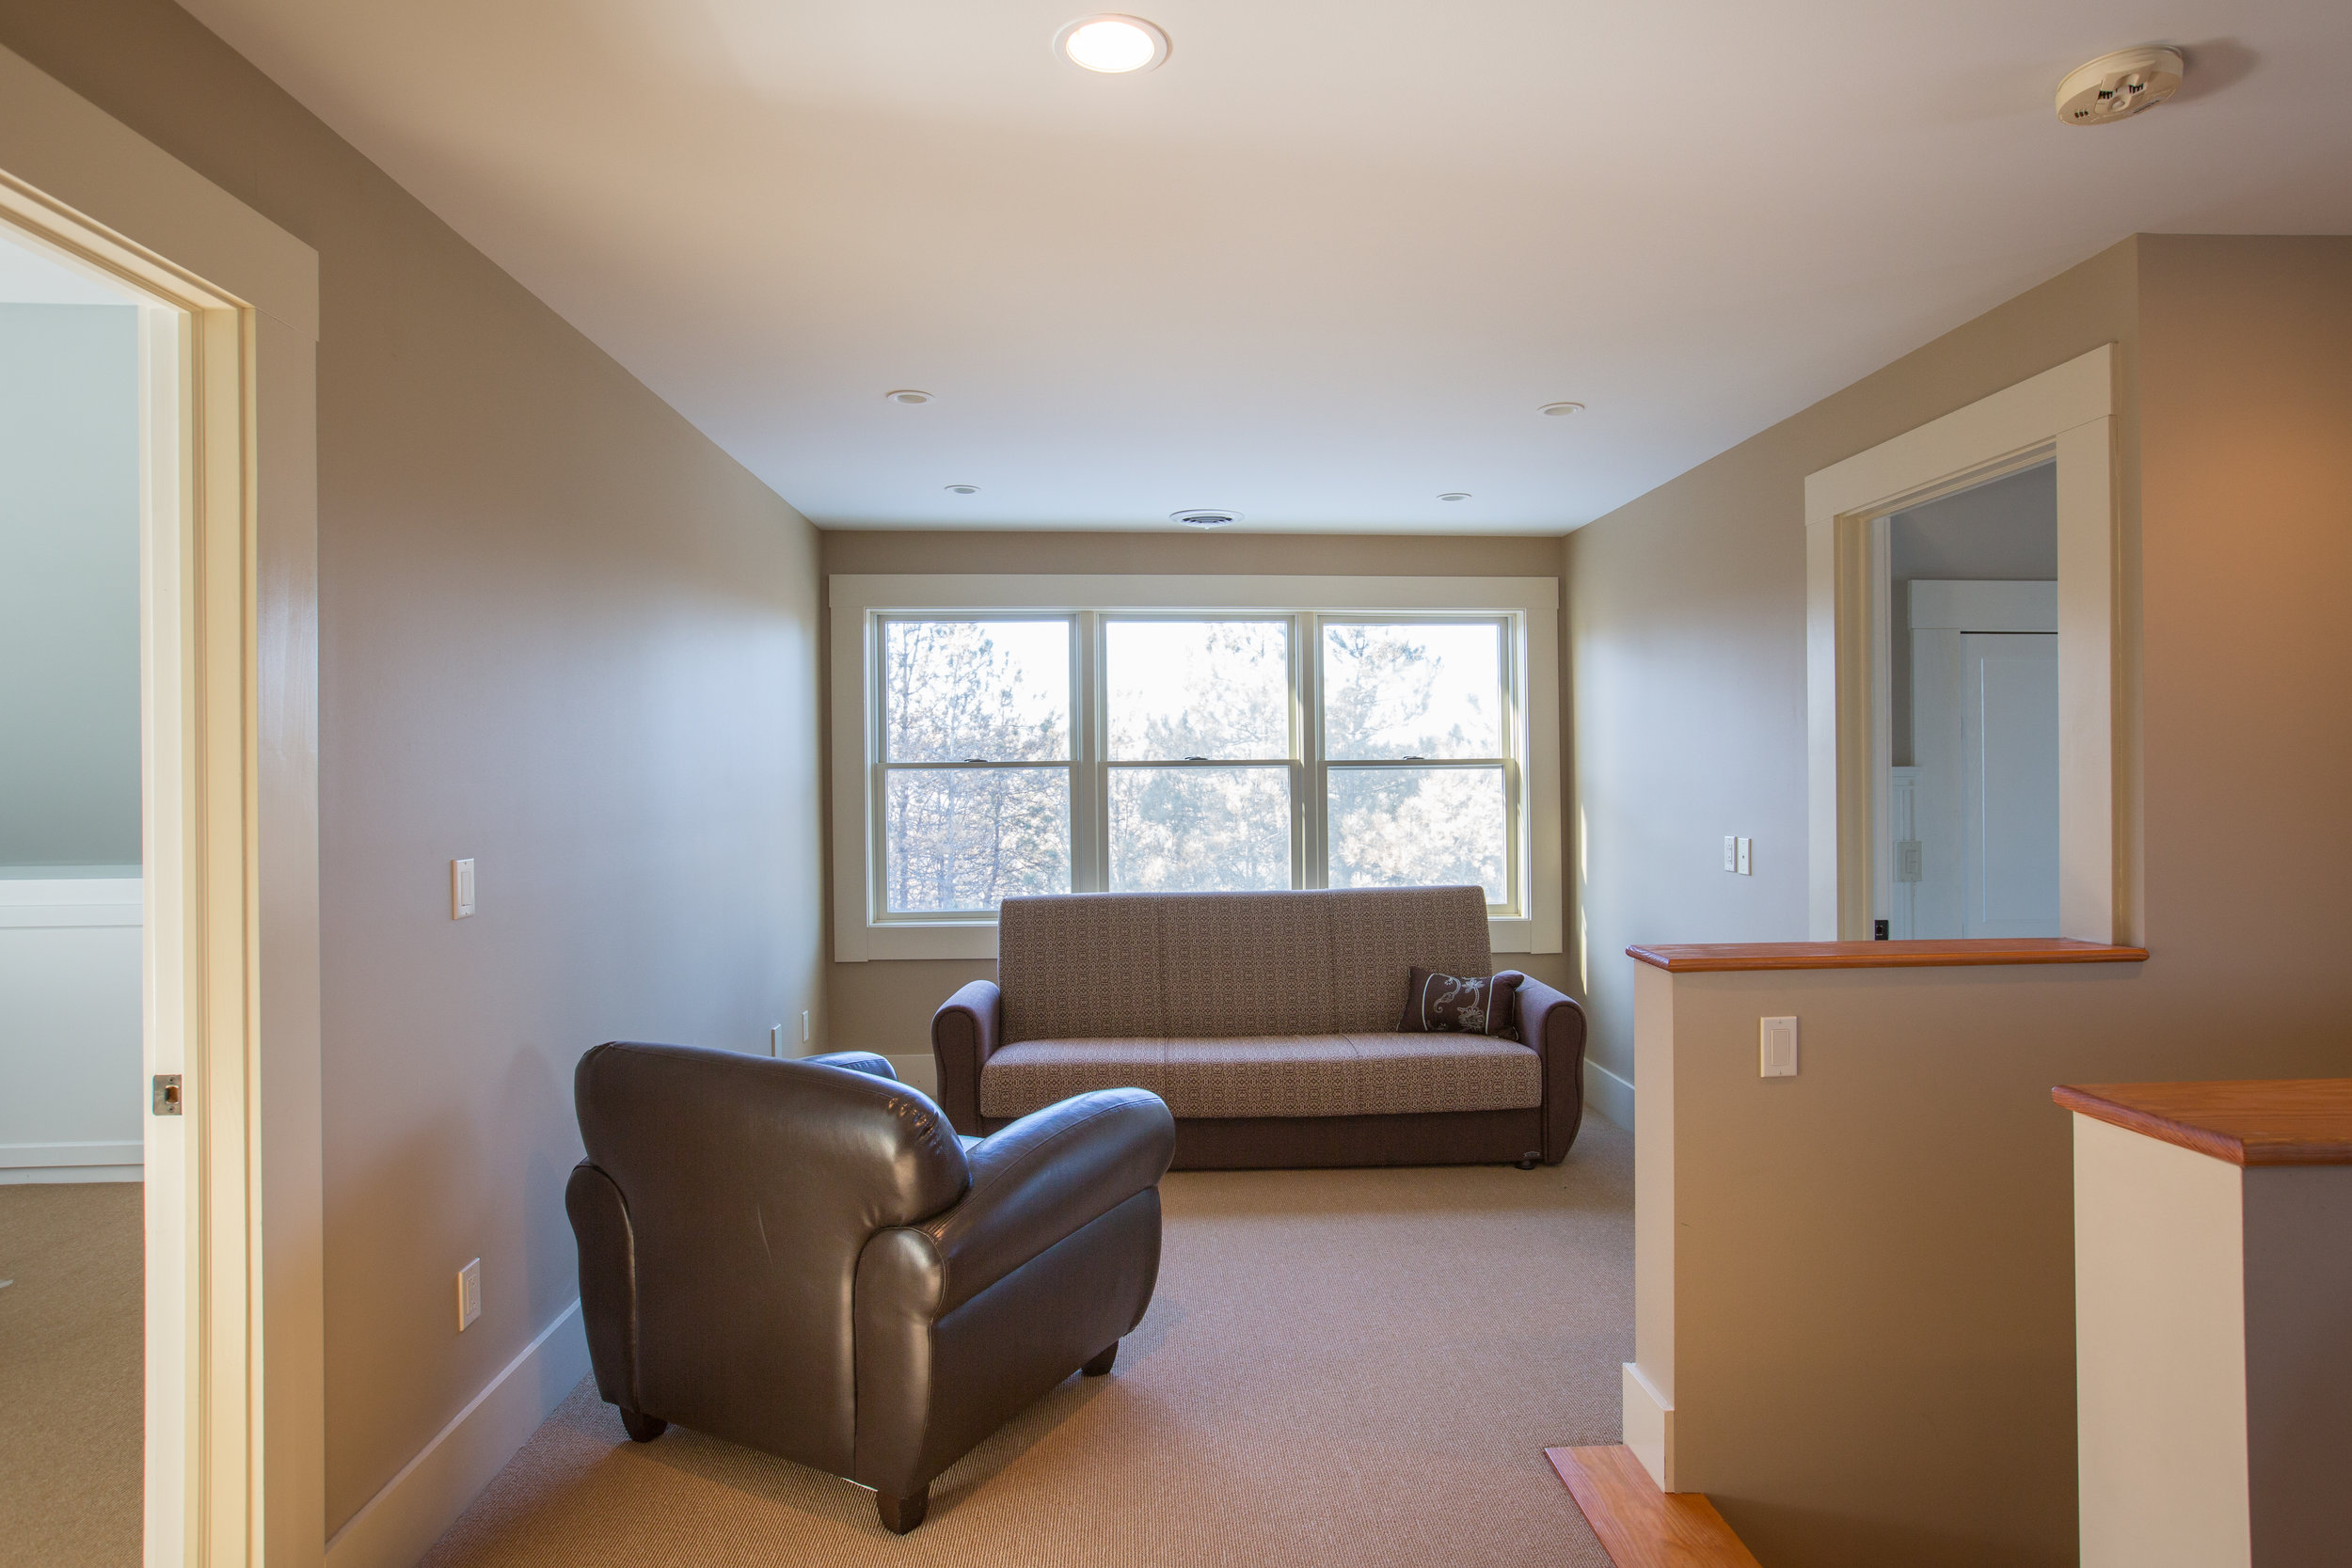  Upstairs sitting area.  To the right of the stair case the space is used as a sitting area.  Three windows are next to one another with a futon against the windows and a chair is positioned nicely center left of photo. 